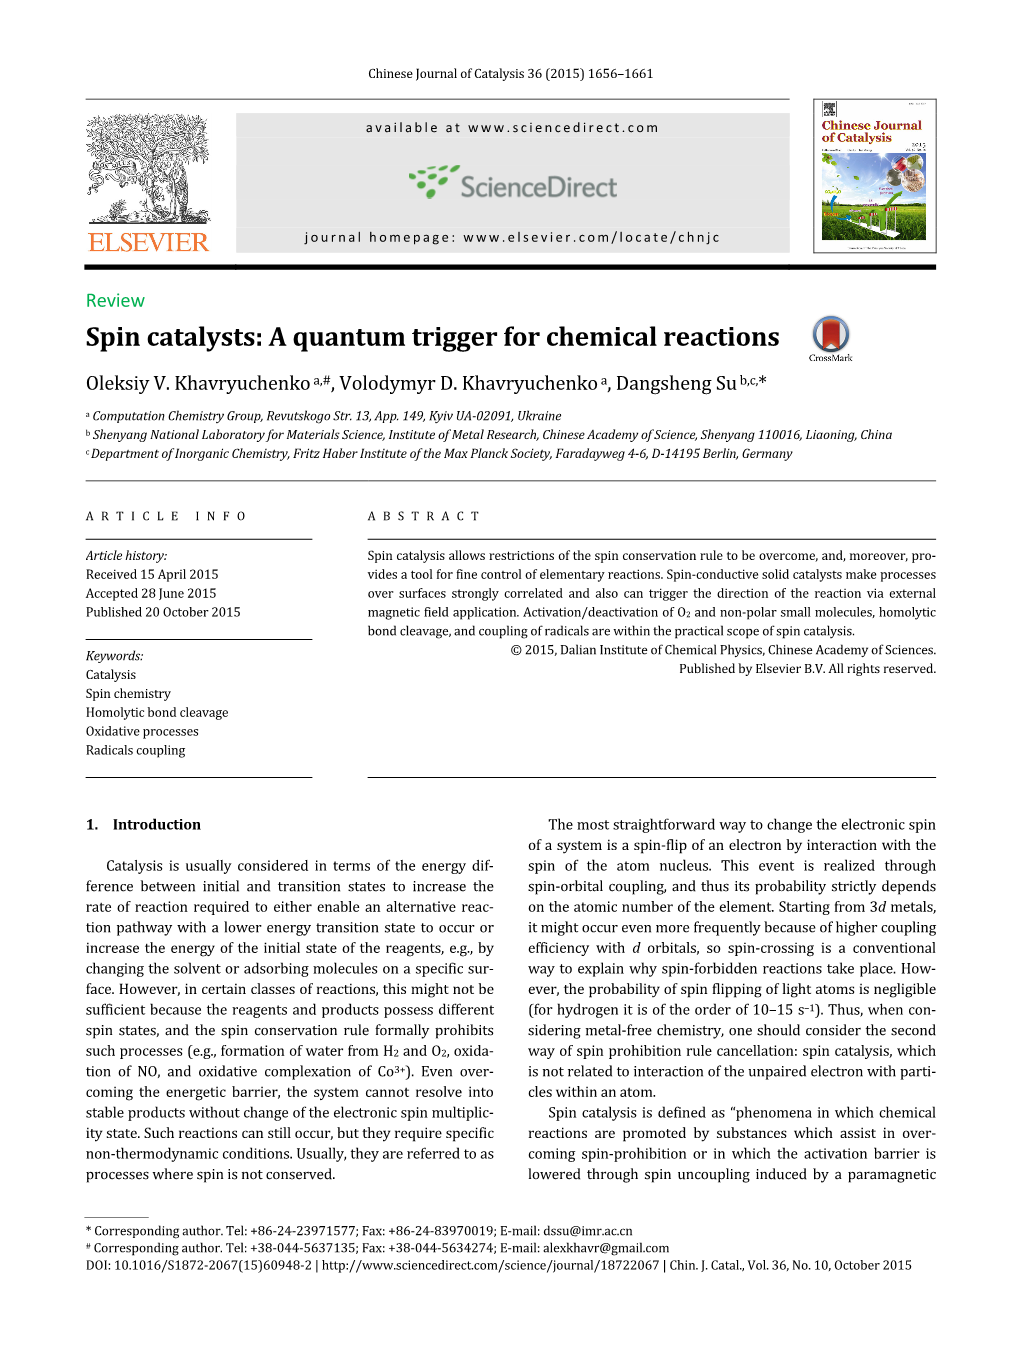 Spin Catalysts: a Quantum Trigger for Chemical Reactions